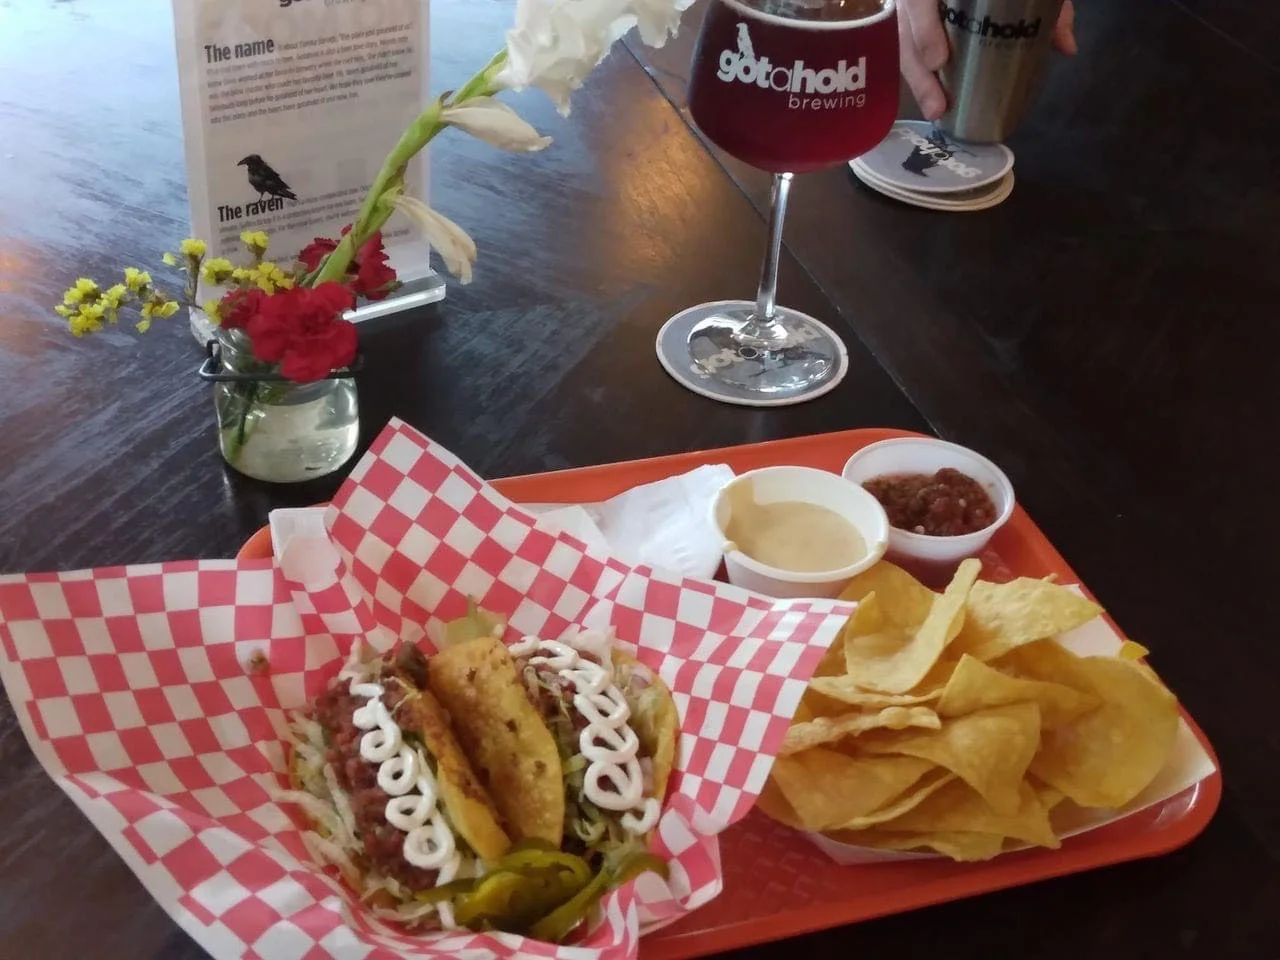 Gotahold Brewing & Twisted Taco